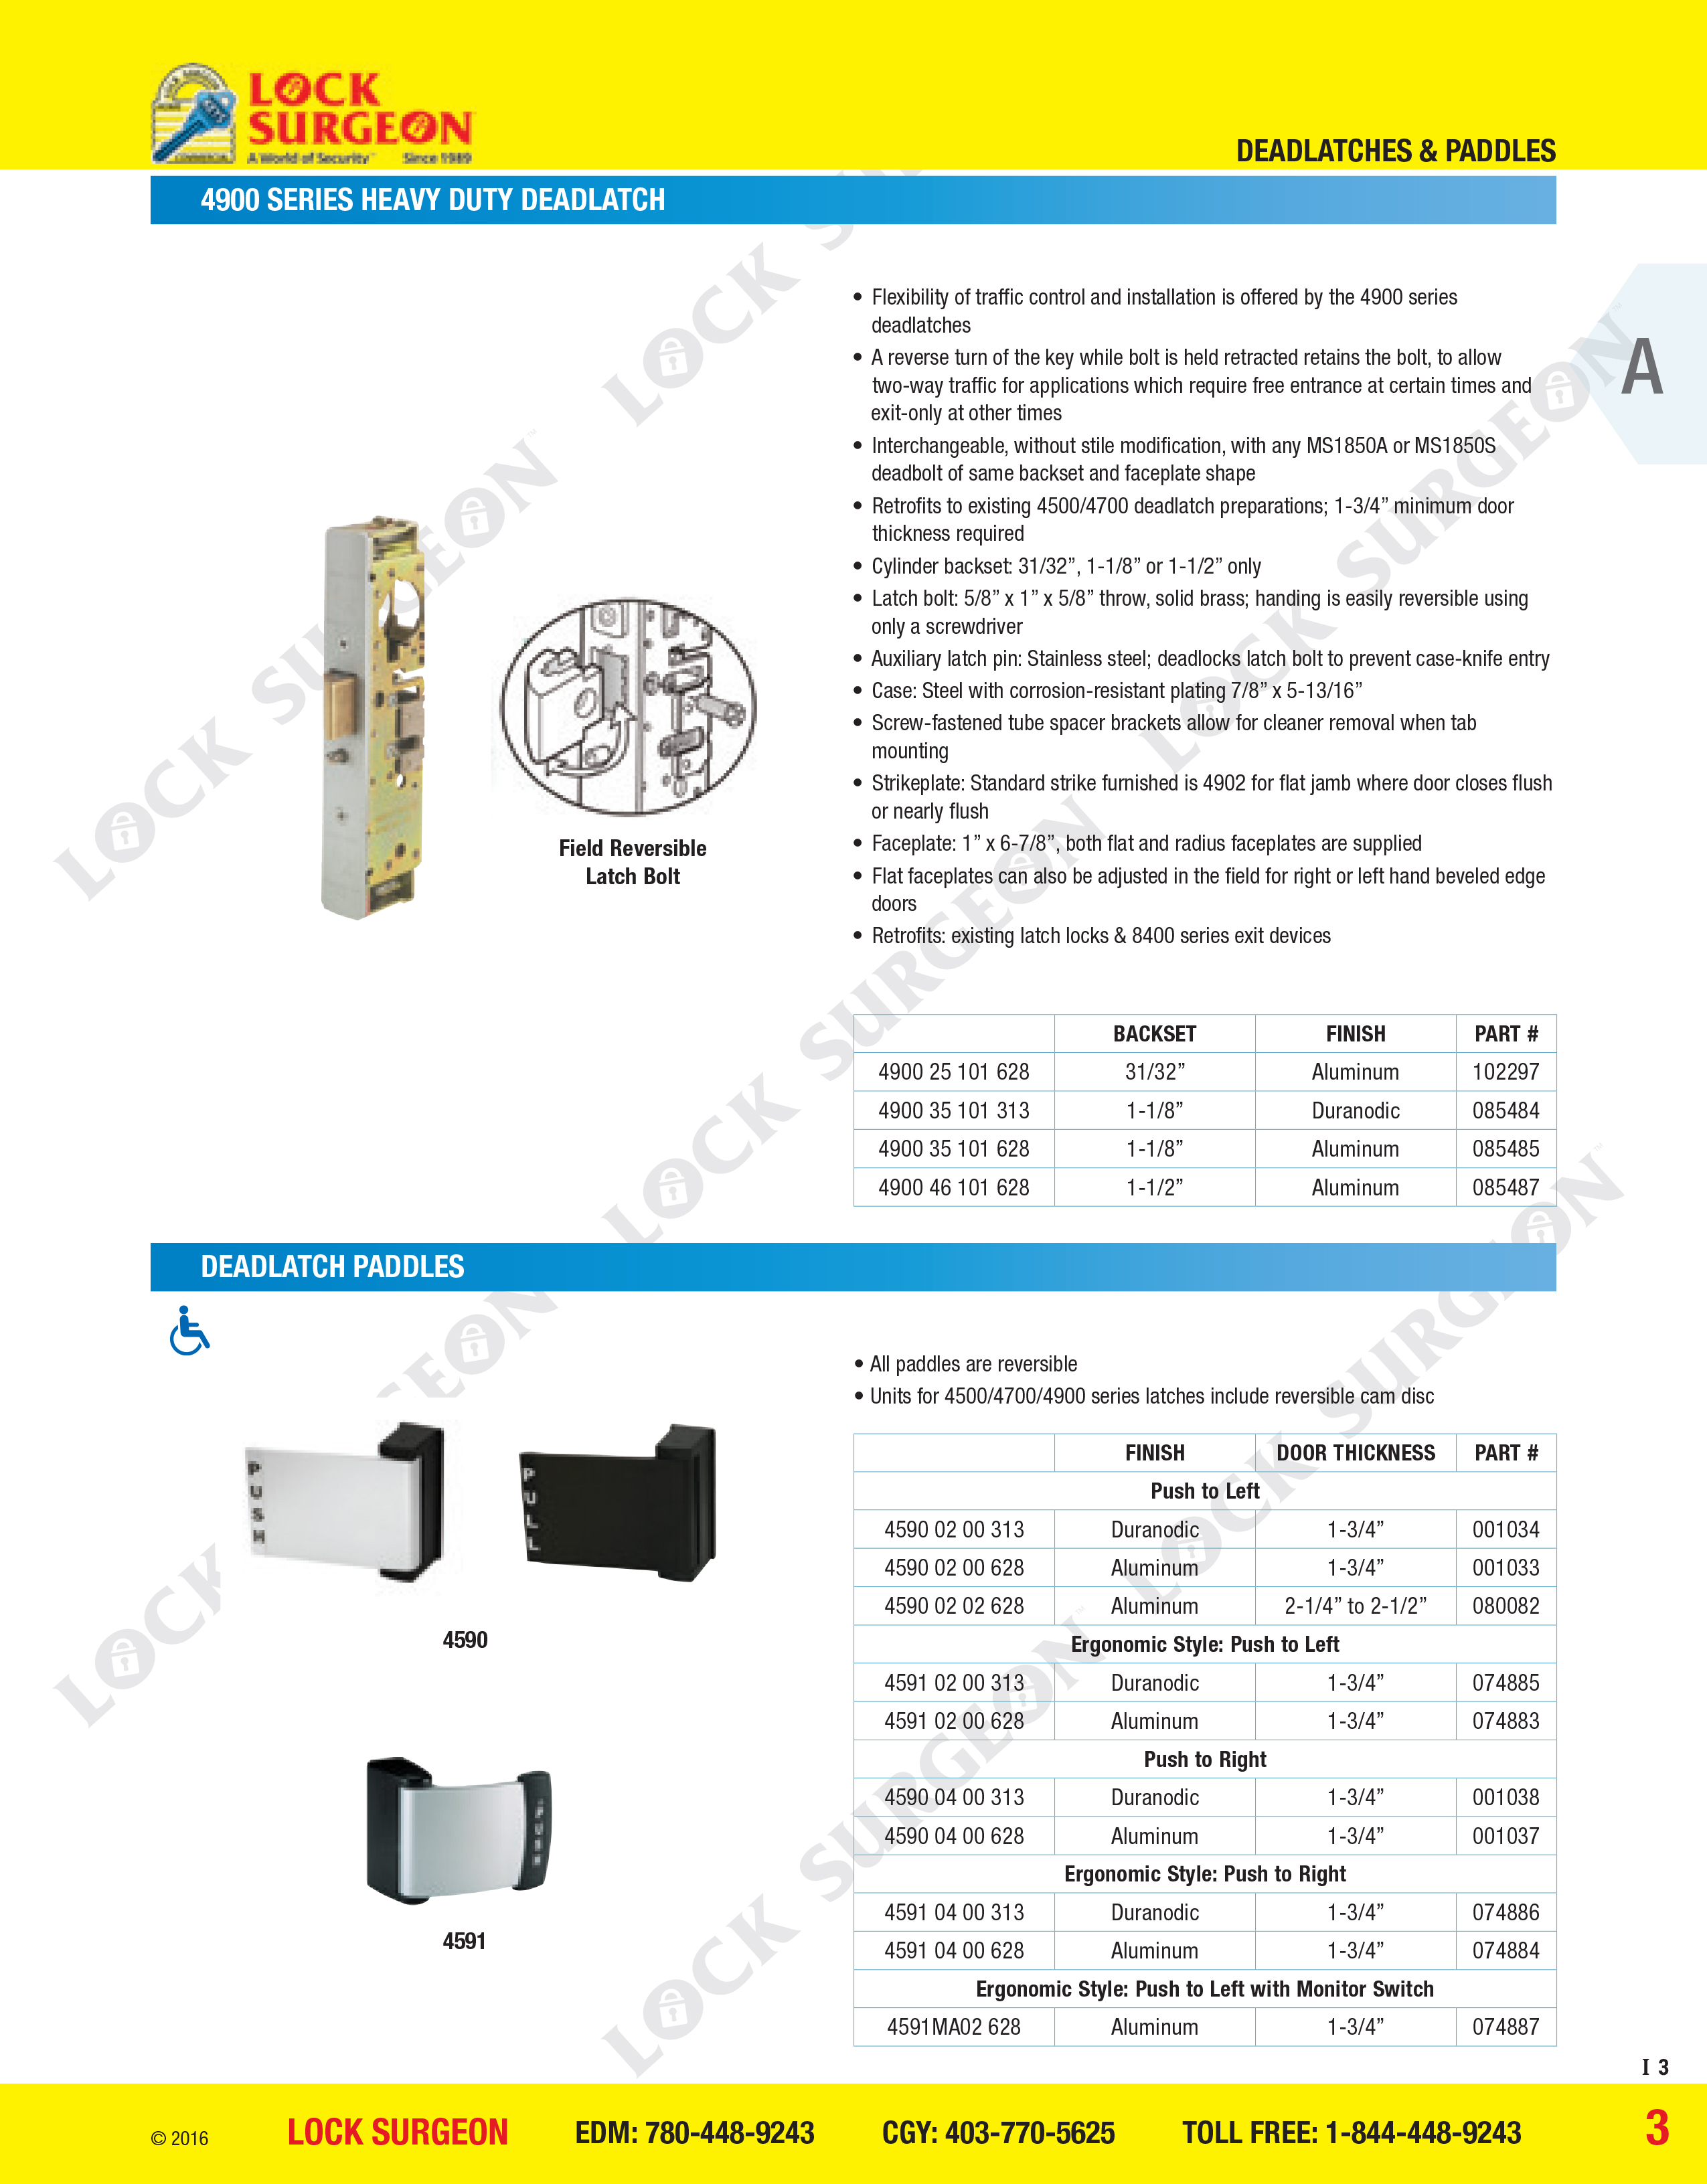 4900 Series heavy duty deadlatch and deadlatch paddles.